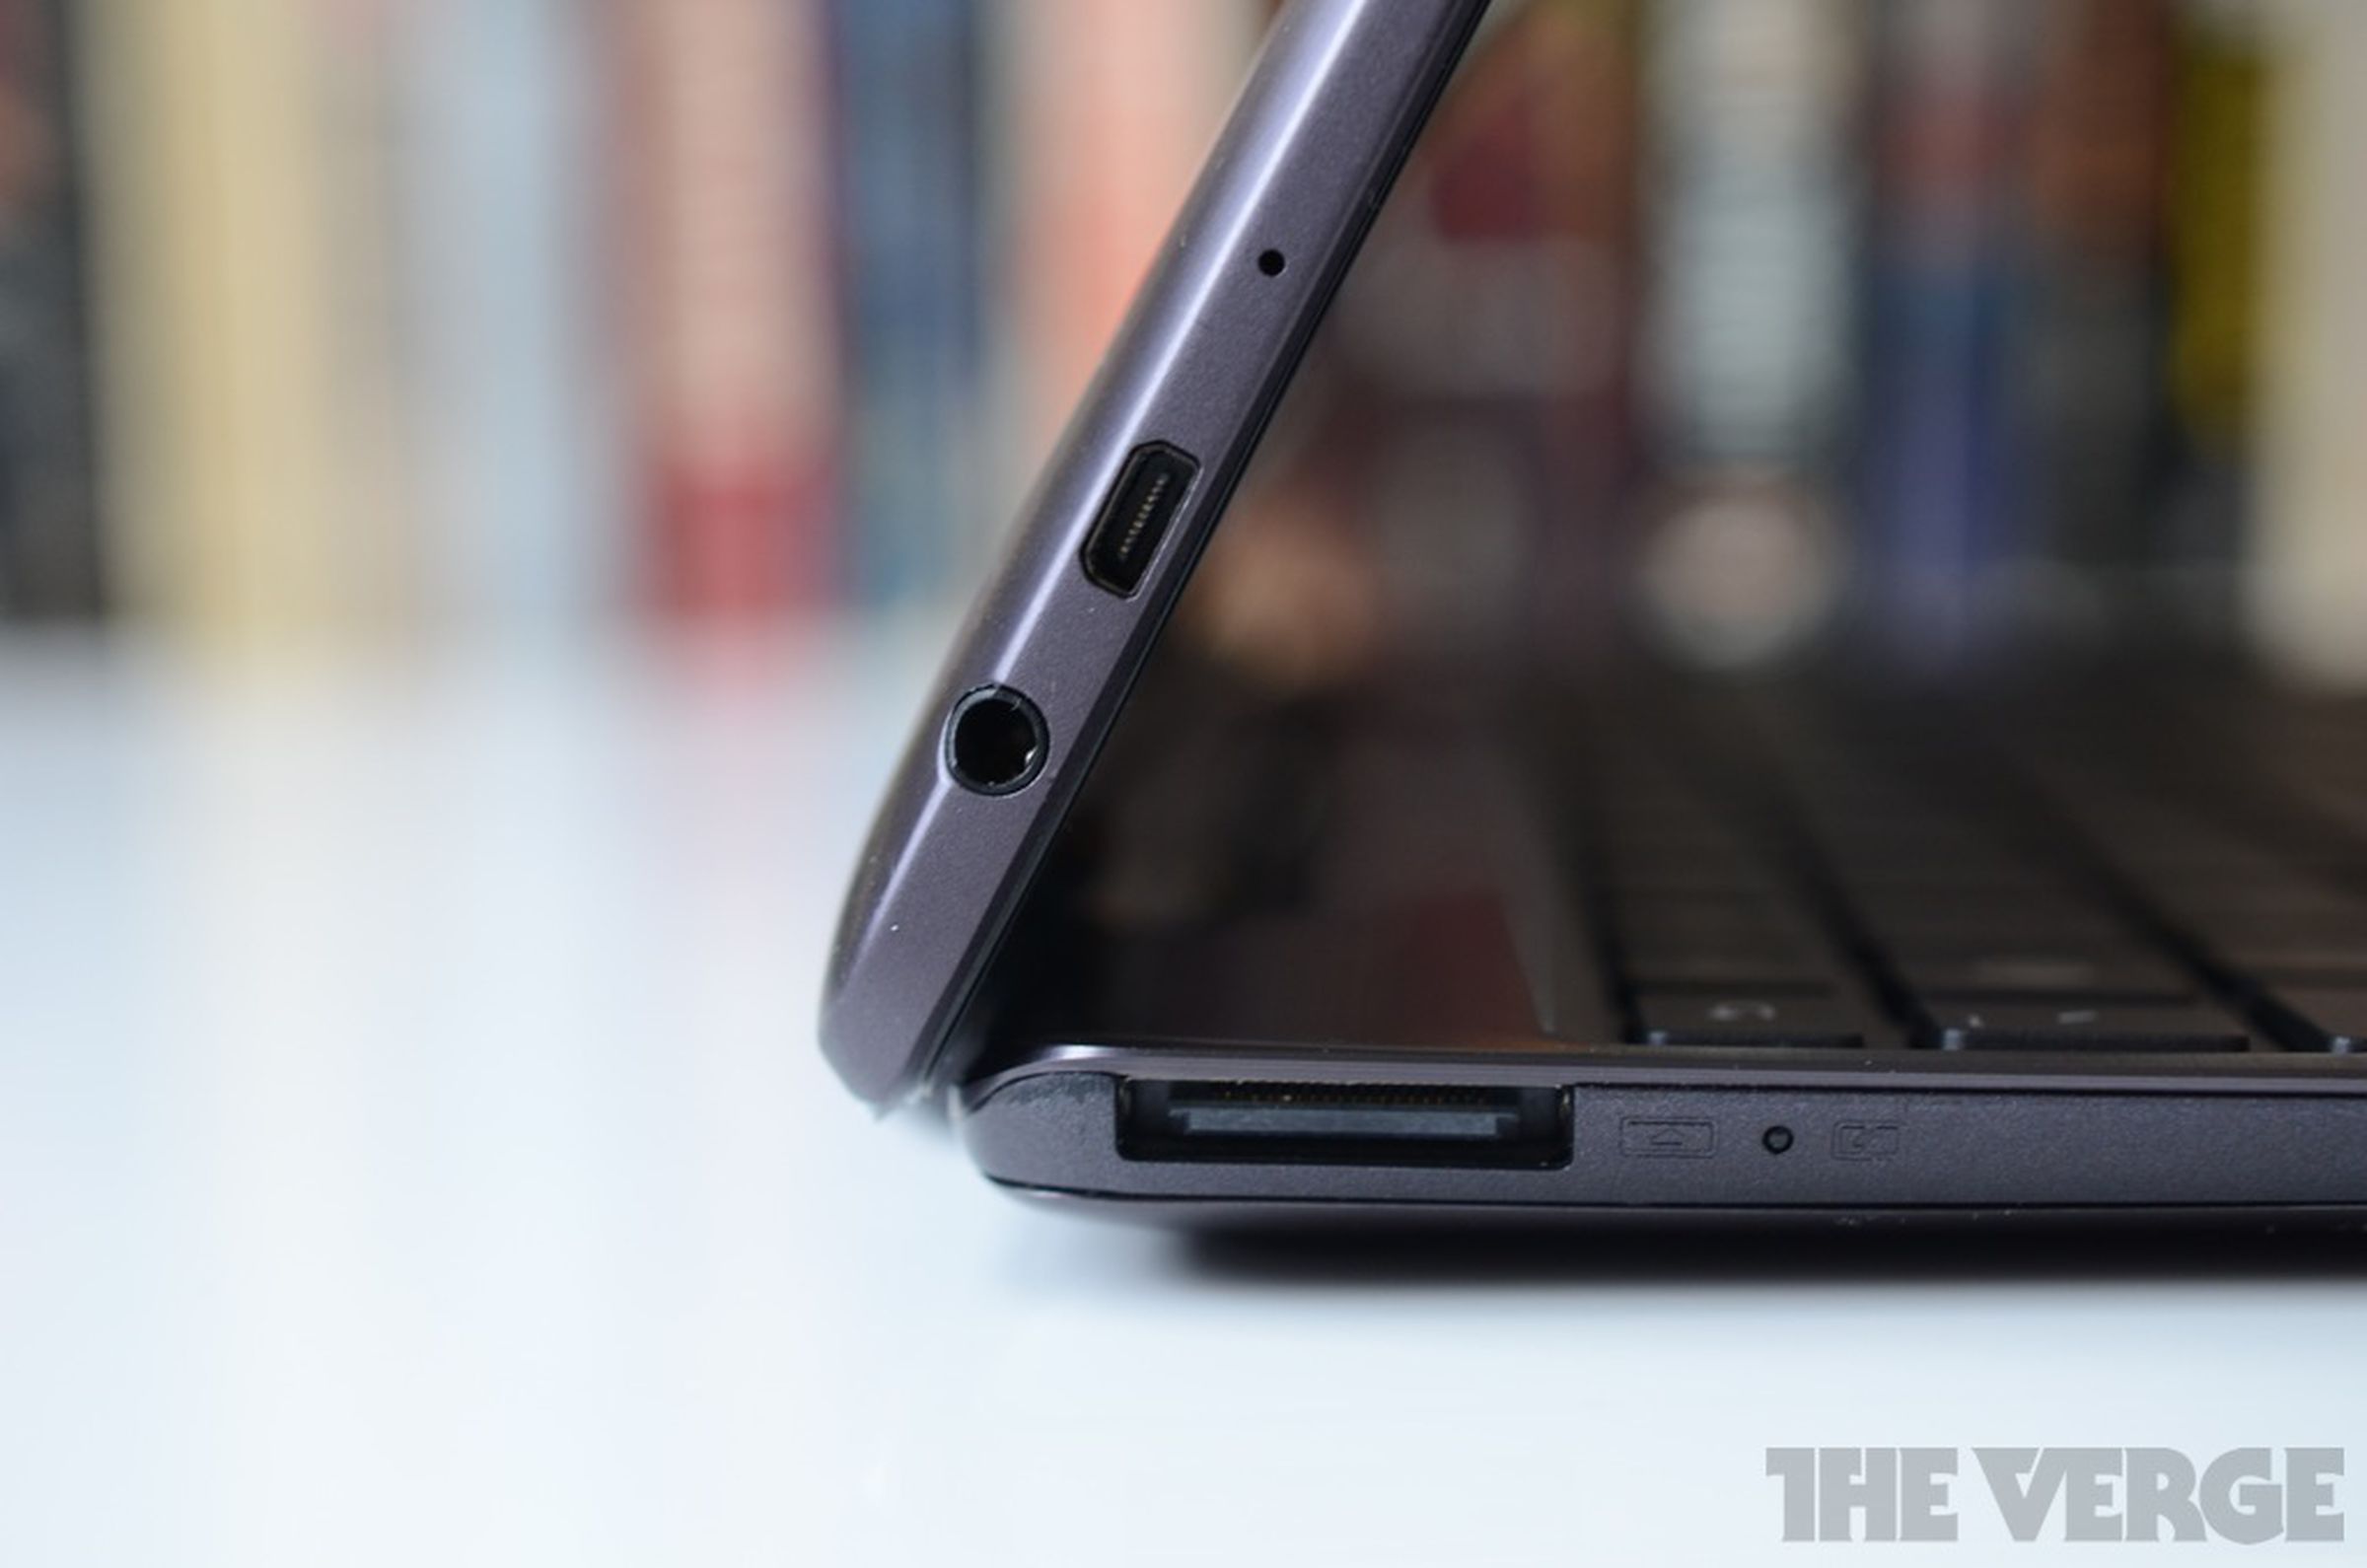 Asus Transformer Pad Infinity review pictures